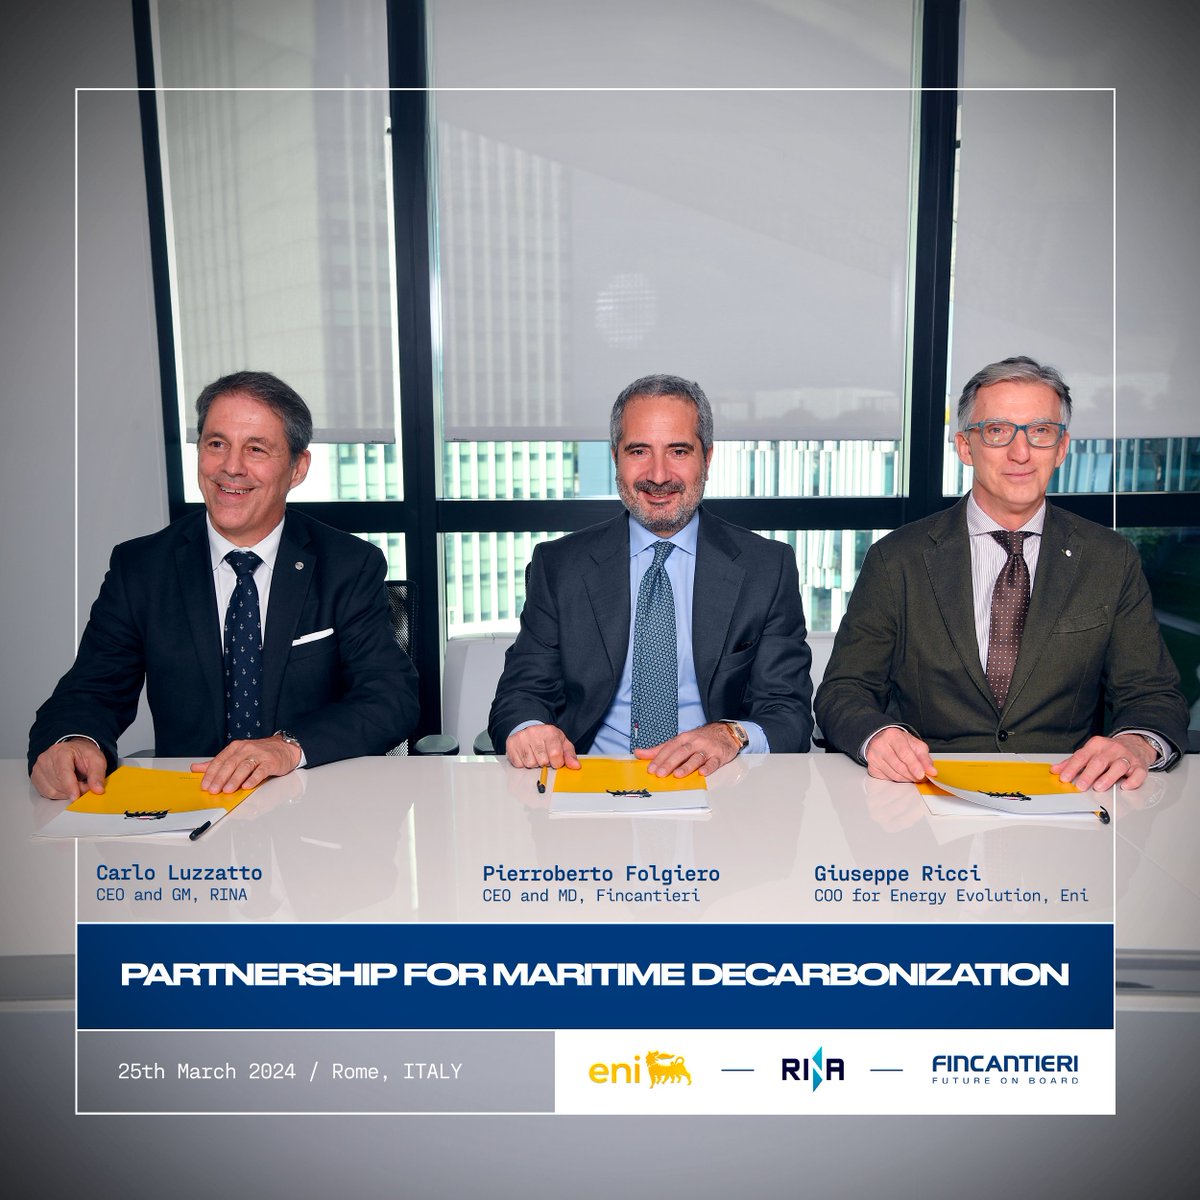 Our road to Net Zero continues thanks to the signing of an agreement with two partners; @eni, a global energy company, and @RINA1861, a multinational inspection, certification, and engineering consultancy. The agreement solidifies a commitment to develop joint initiatives for the…